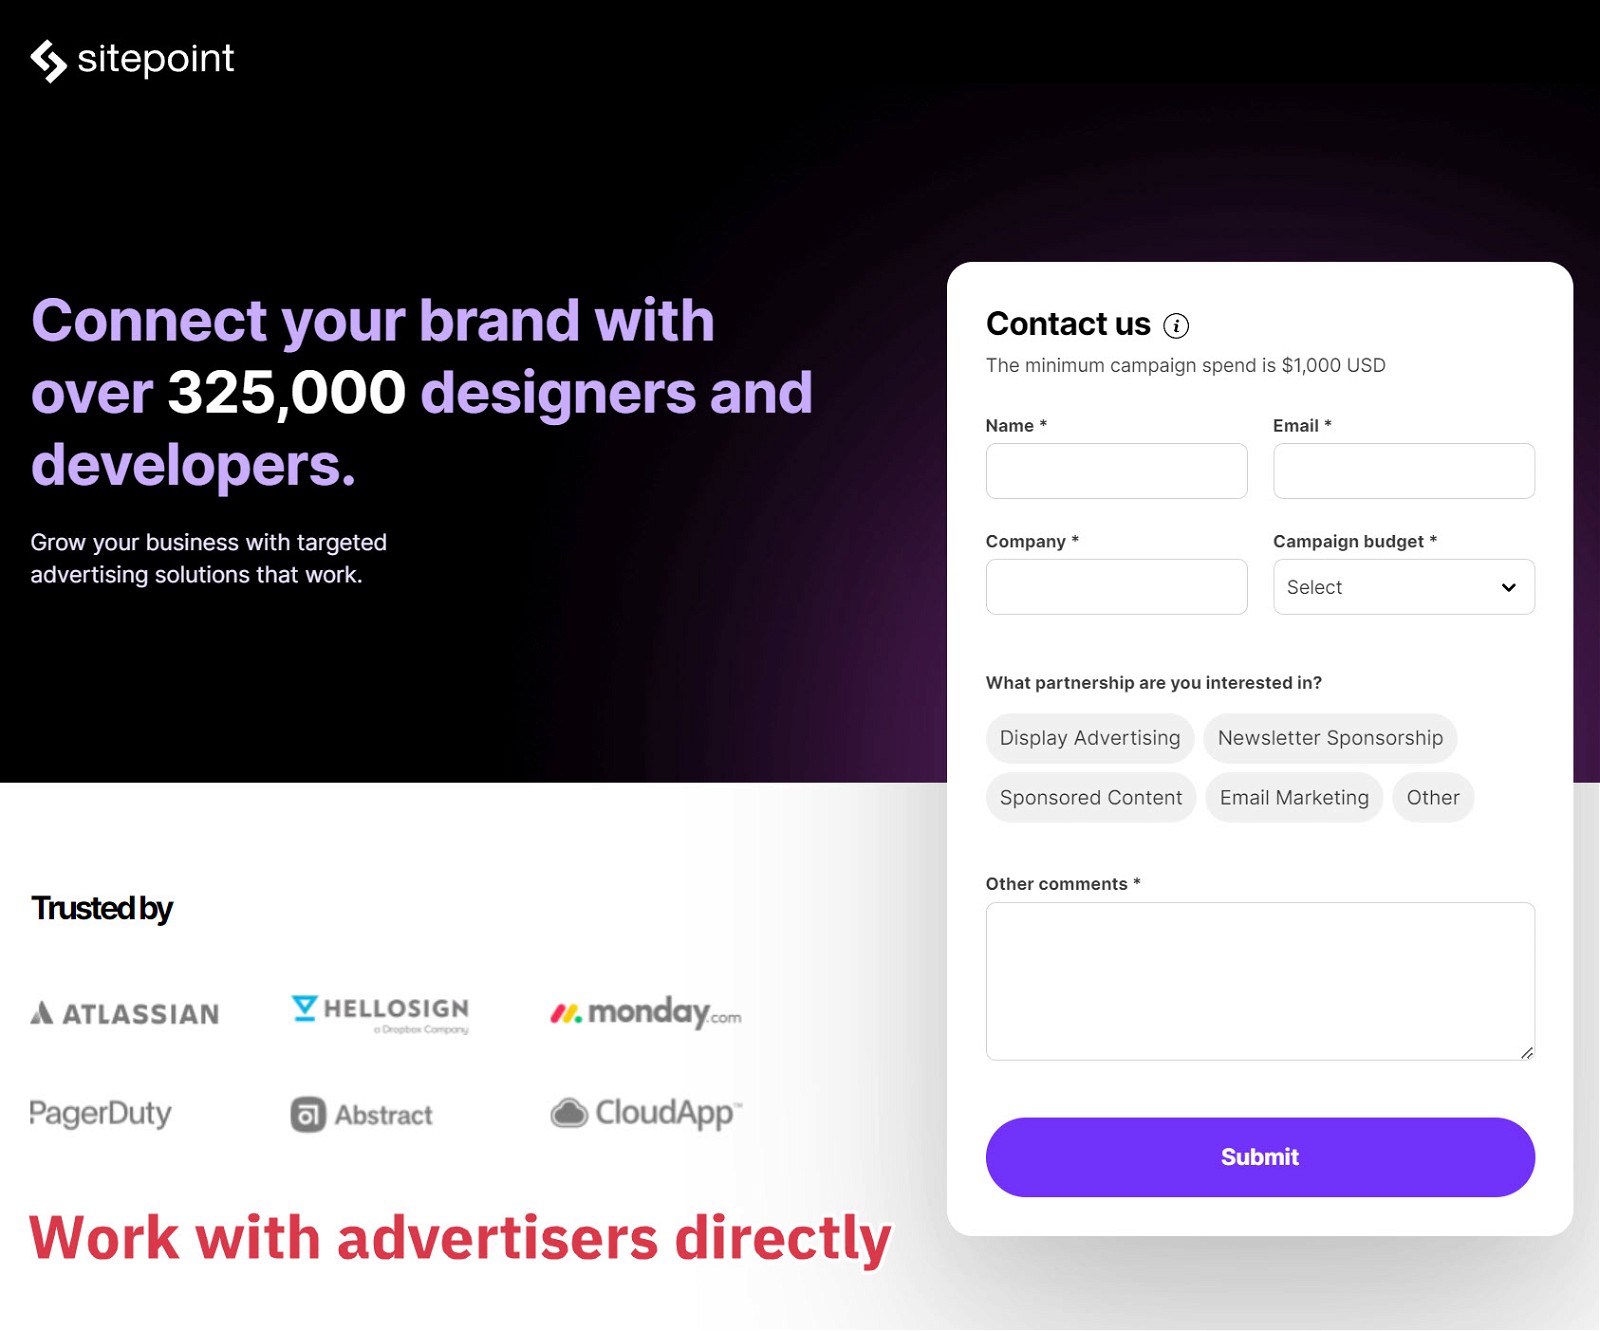 Sitepoint work with advertisers directly